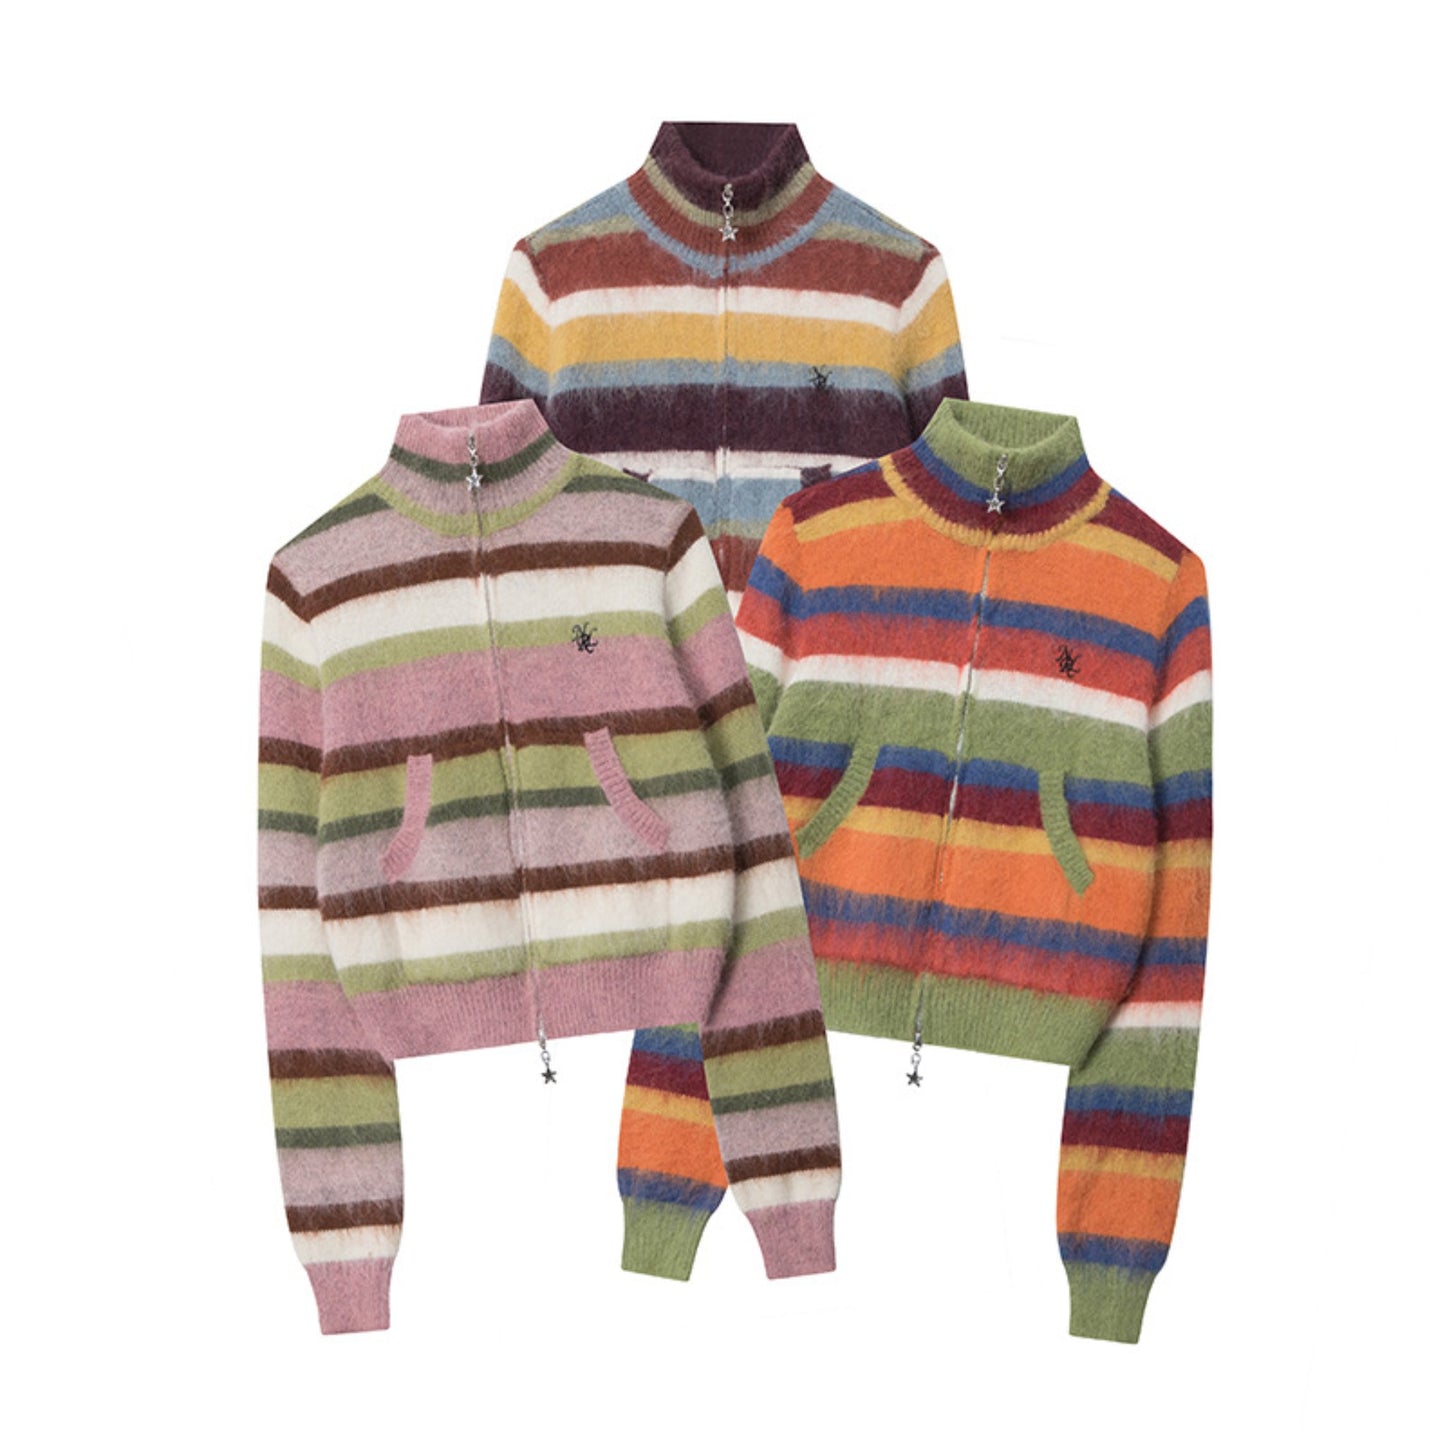 3 Colors Colorful Striped Half Turtleneck Zipper Cardigan Knitted Short Sweater